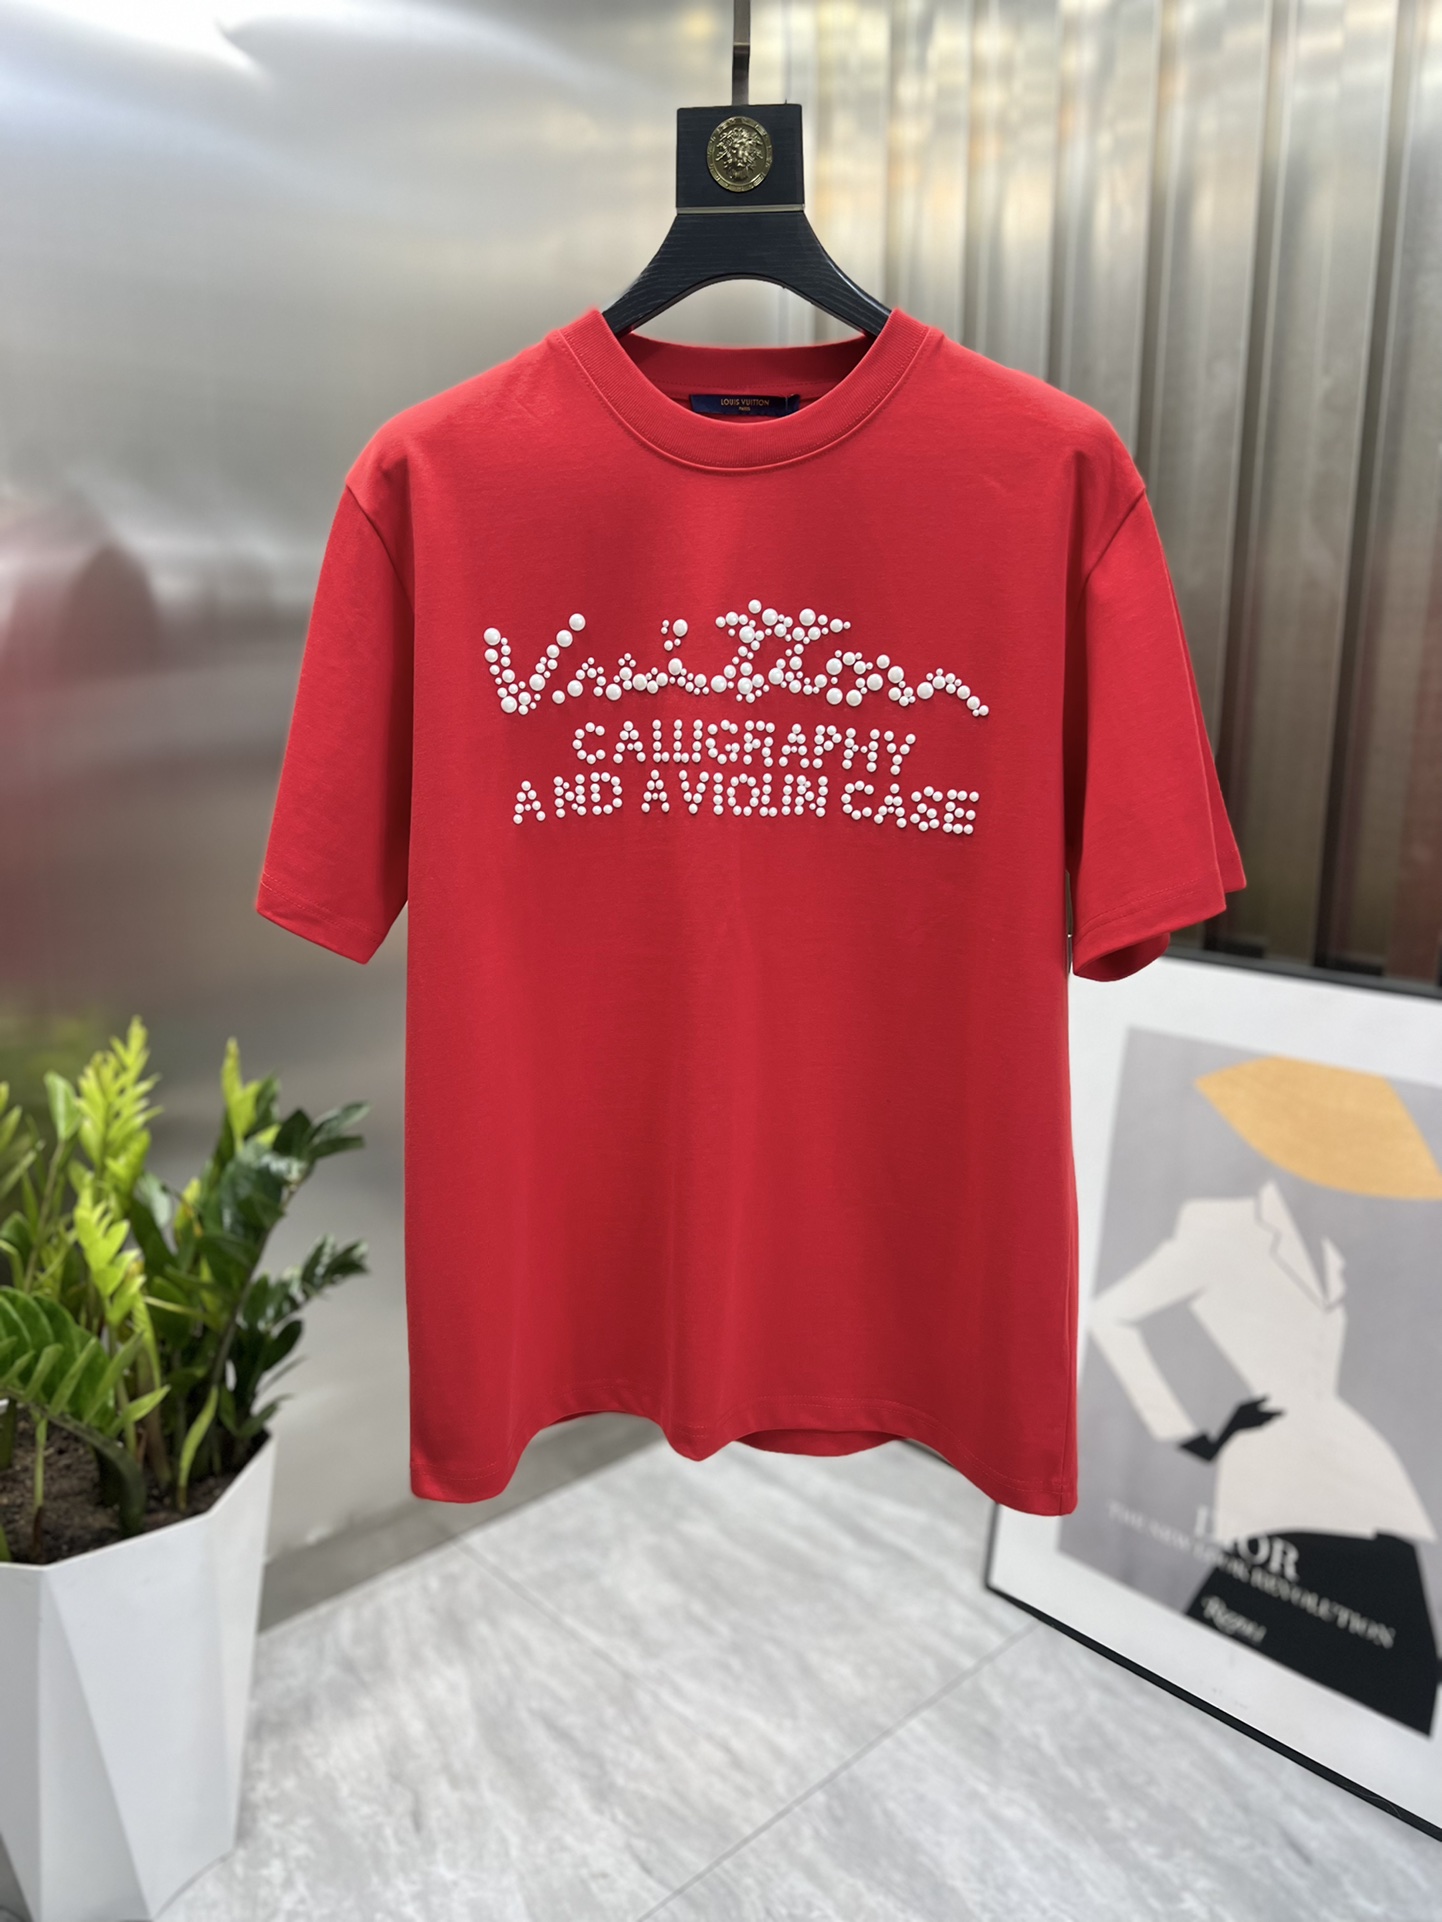 Louis Vuitton Clothing T-Shirt Quality Replica
 Spring/Summer Collection Short Sleeve